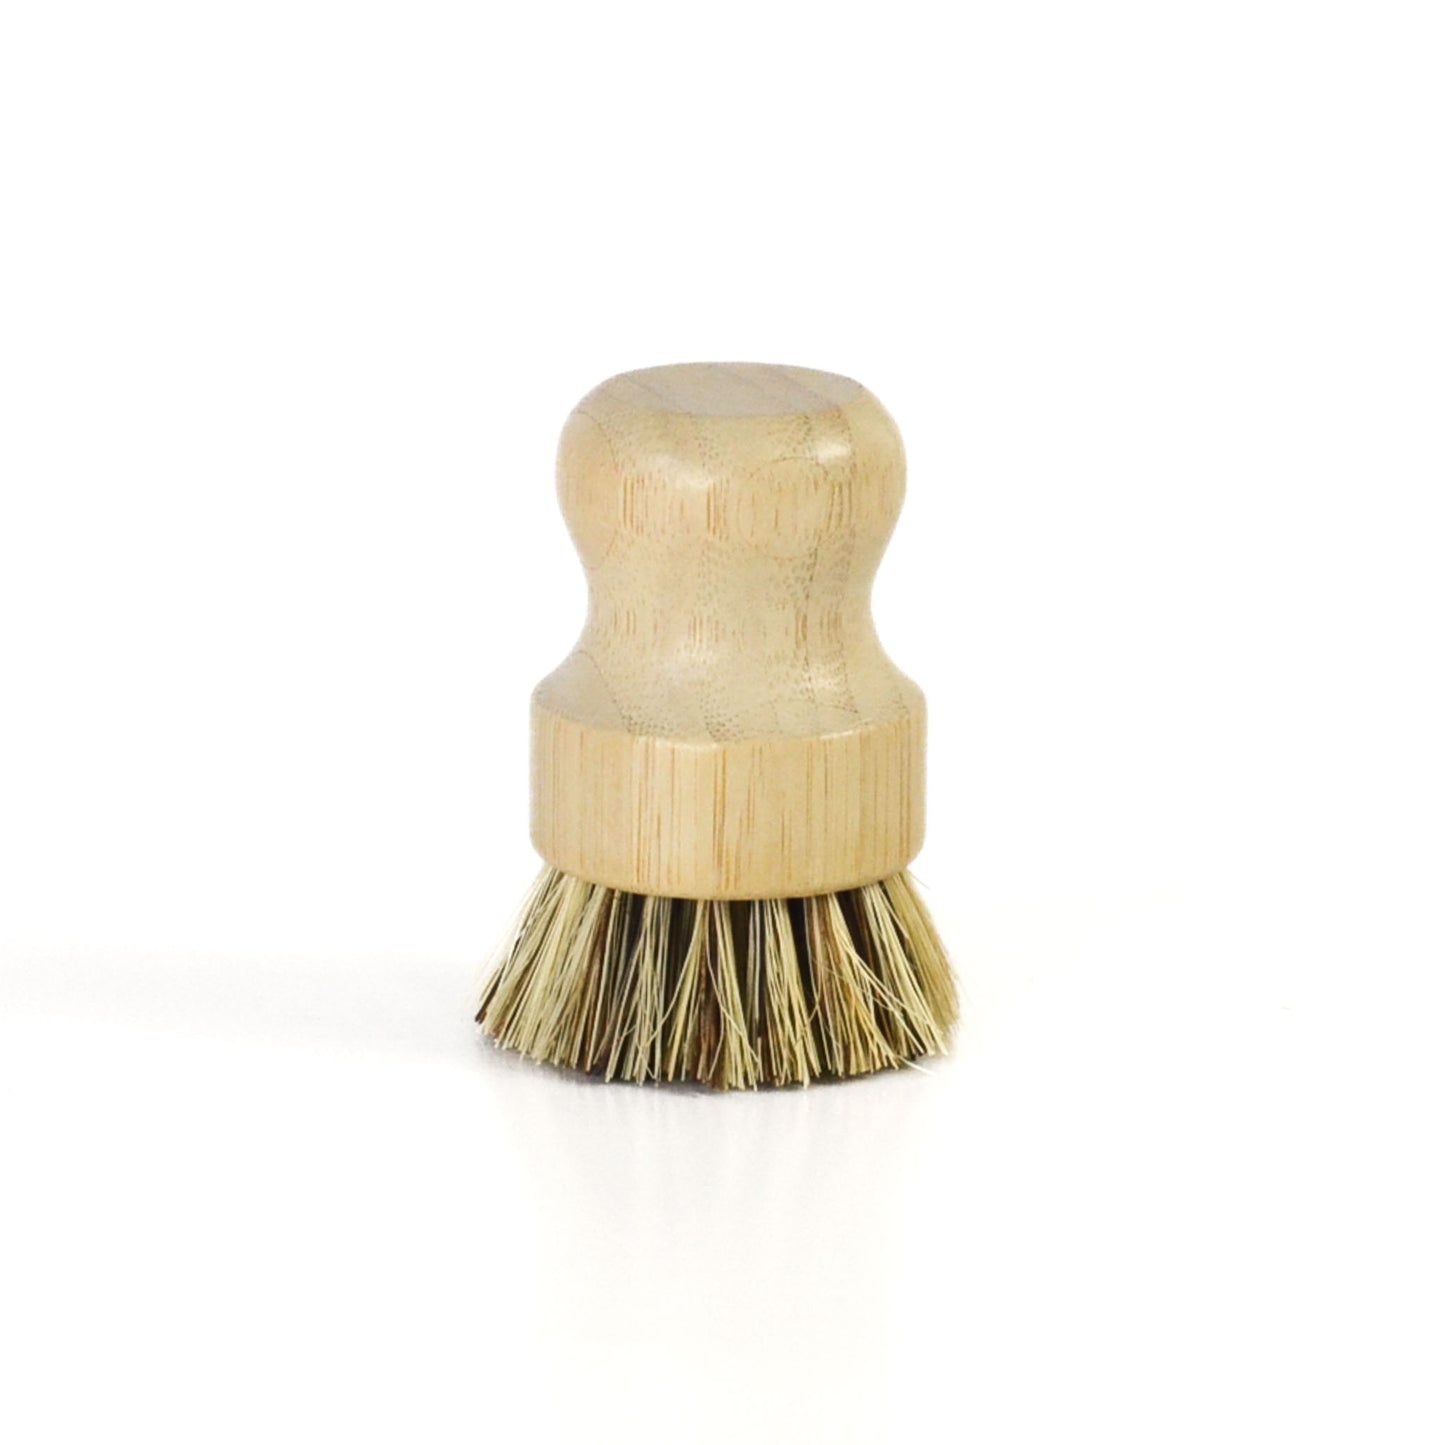  Zero waste and Compostable Coconut Dish Brush